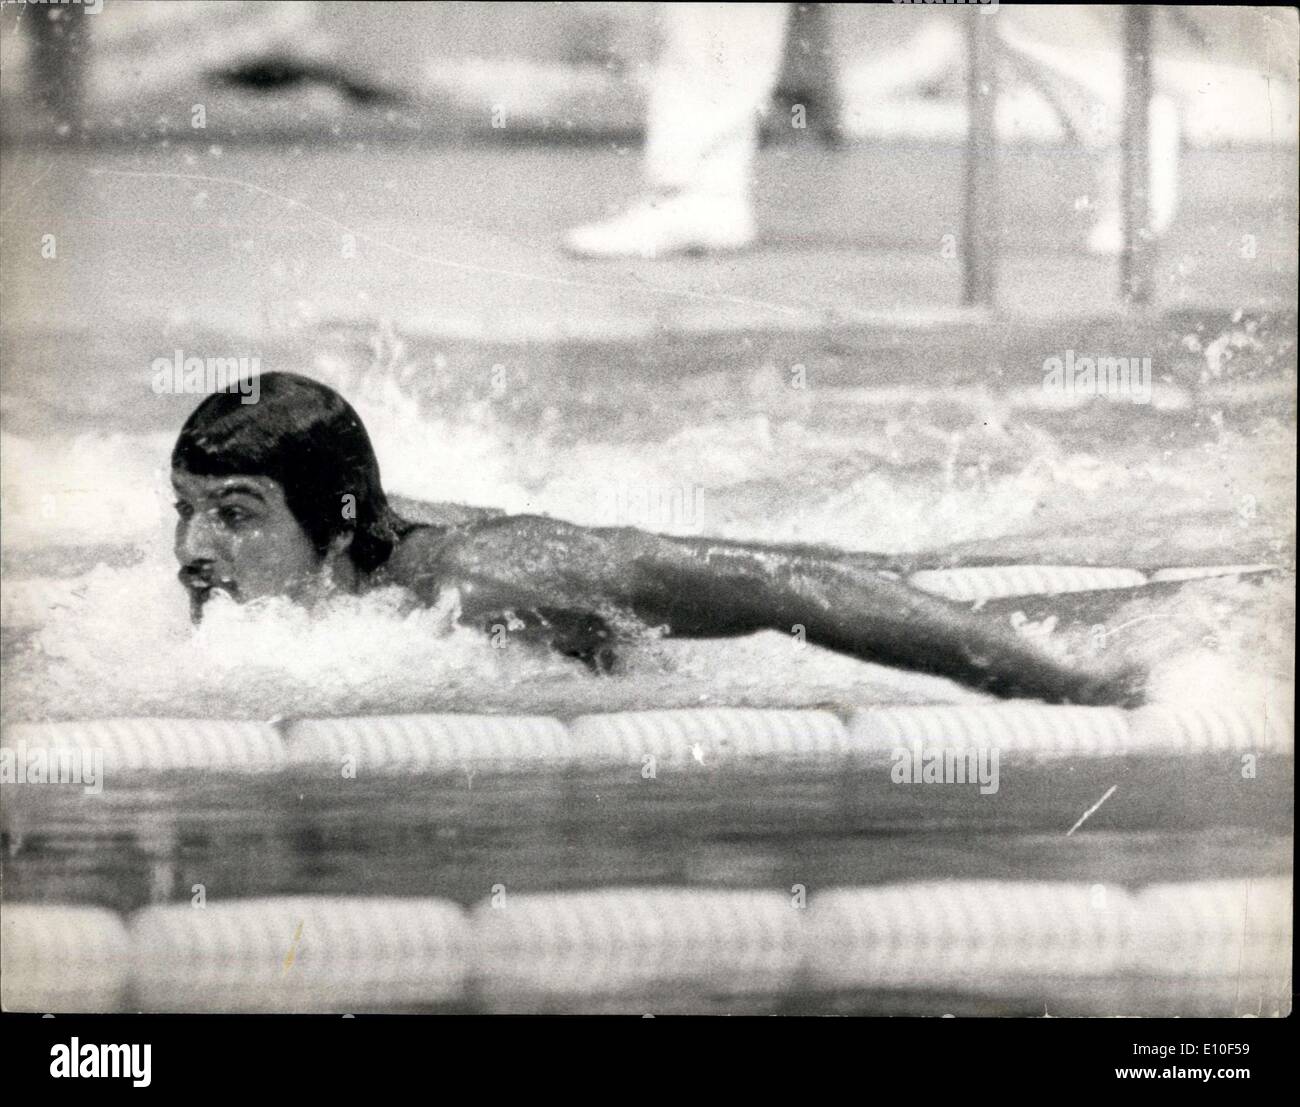 Sep. 04, 1972 - Olympic games in Munich (swimming). Mark Spitz wins his fifth gold medal.: Mark Spitz of America, on his way to Stock Photo